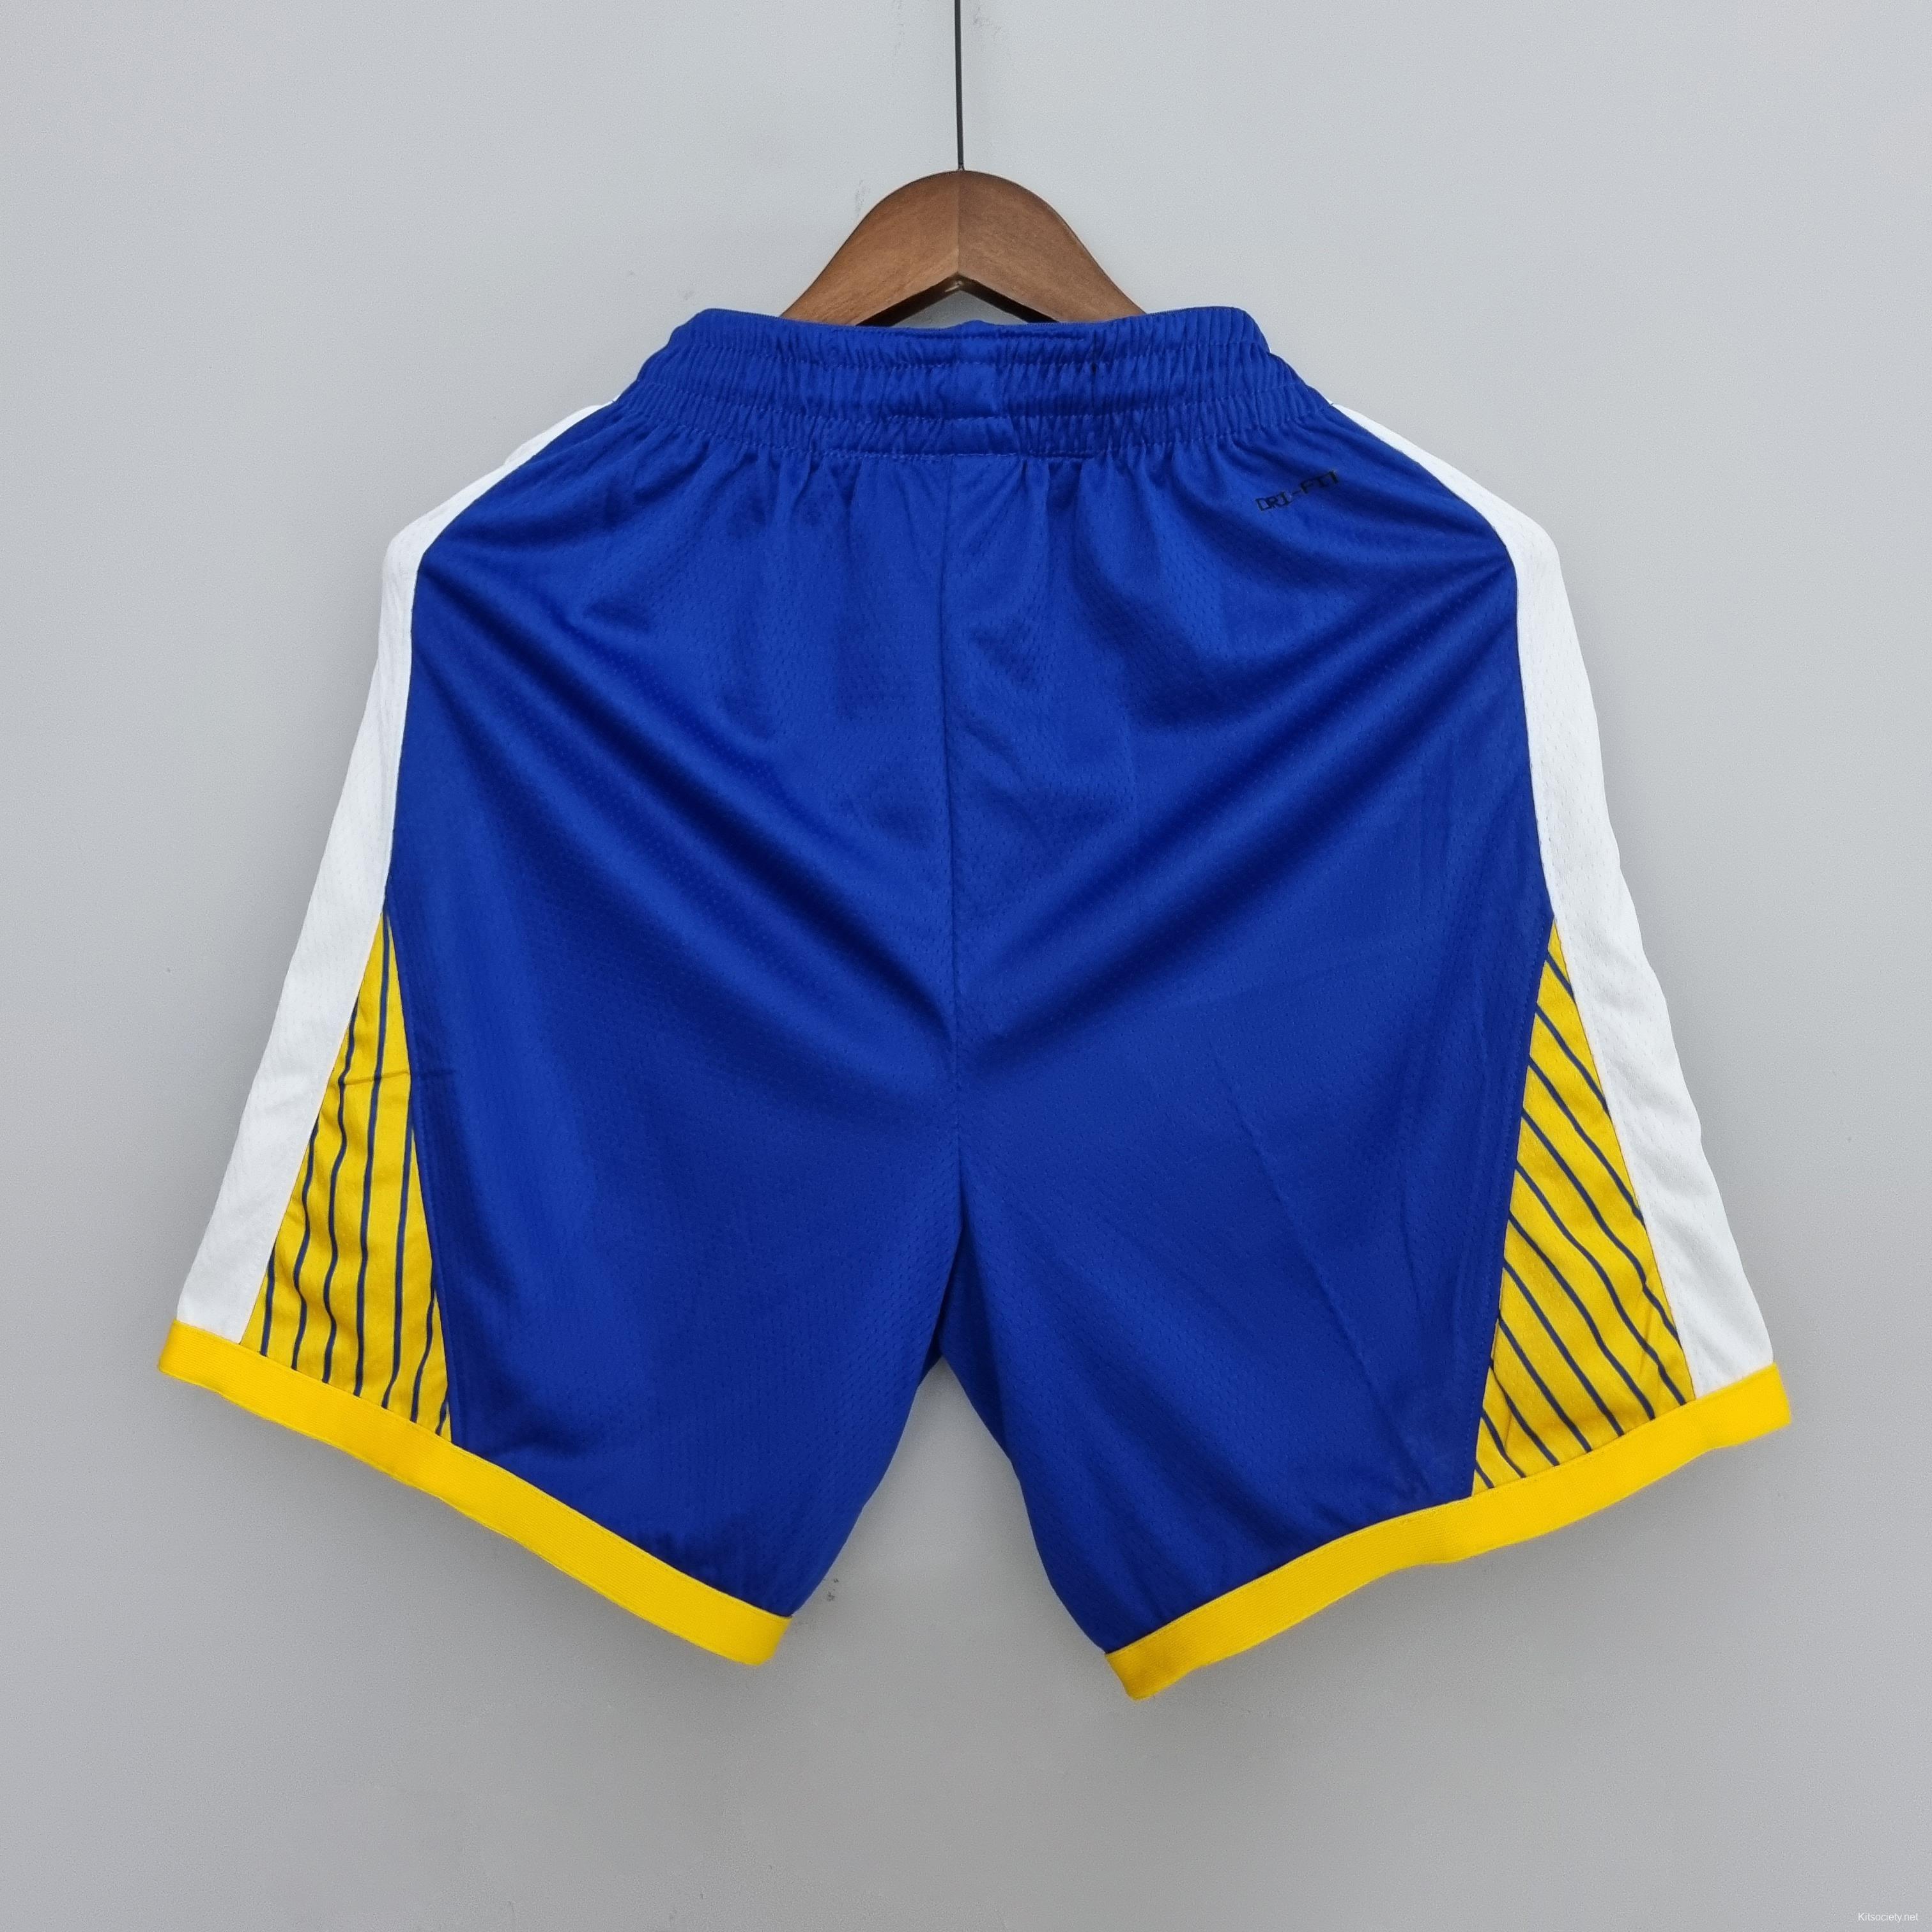 Golden State Warriors Authentic Adidas Shorts NBA Basketball L Blue Sewn  Lounge